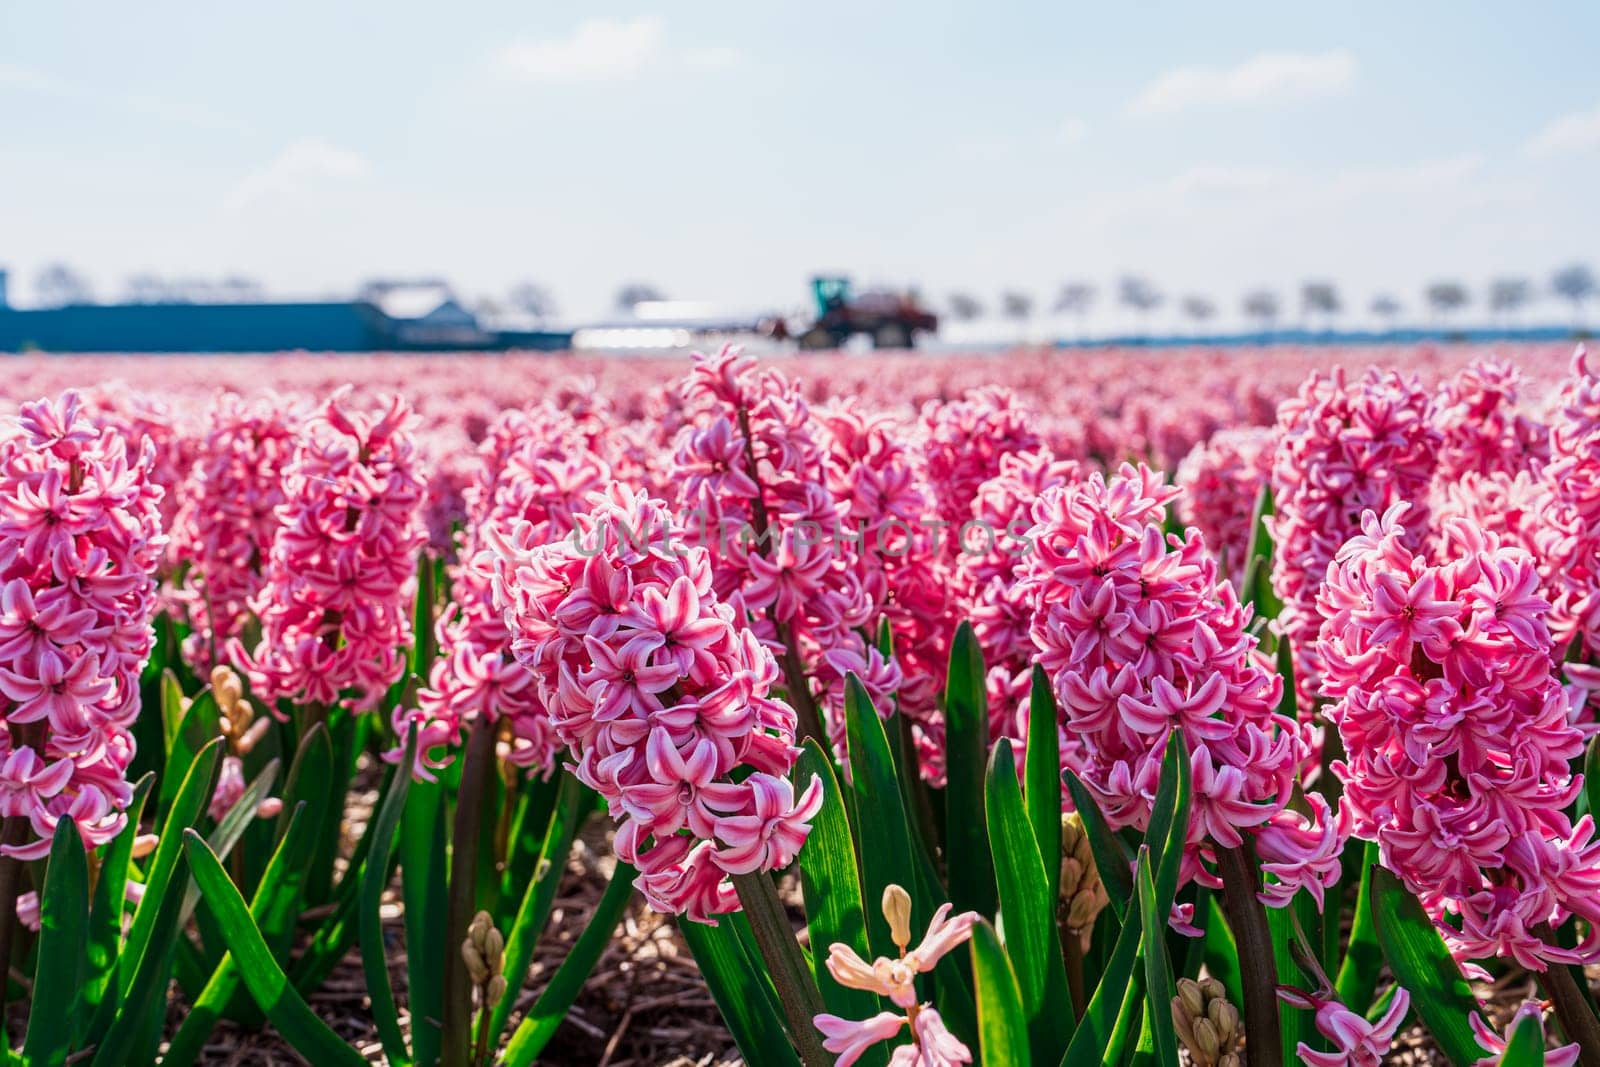 Huge Pink Aromatic Field of Blooming Hyacinths in Bright Day. Captivating Sights of Fragrance, Beauty by PhotoTime